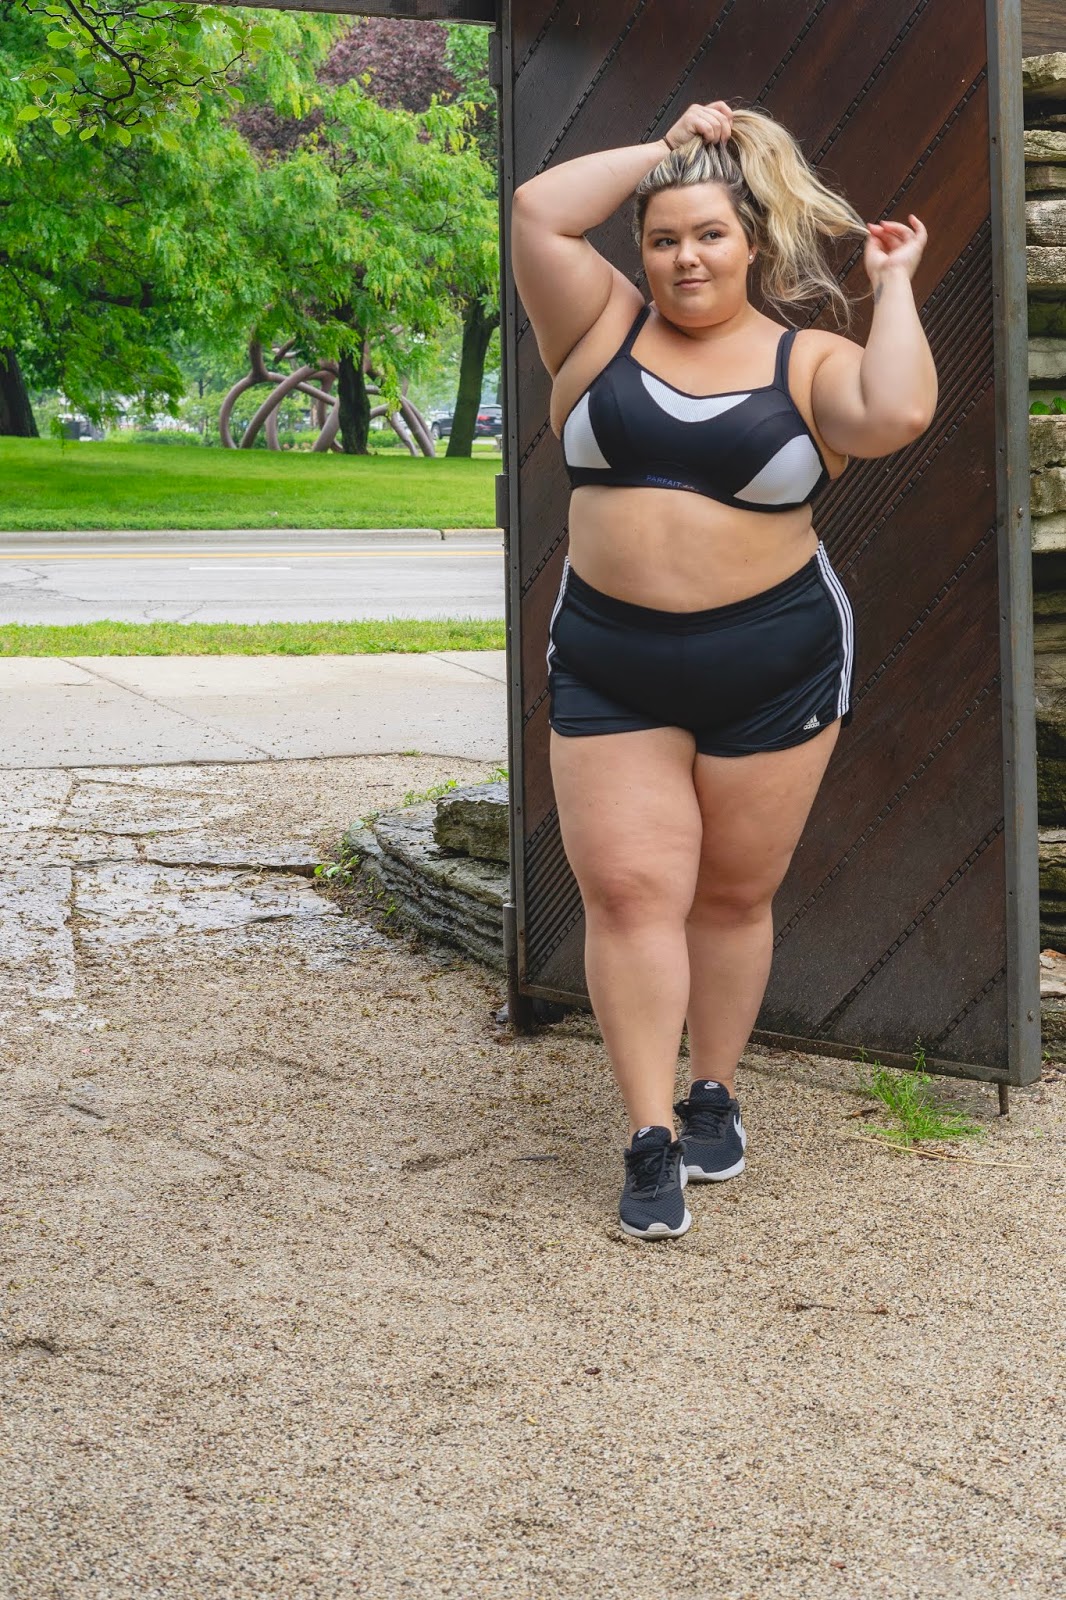 Big Girls Extended Sizes Sports Bras.